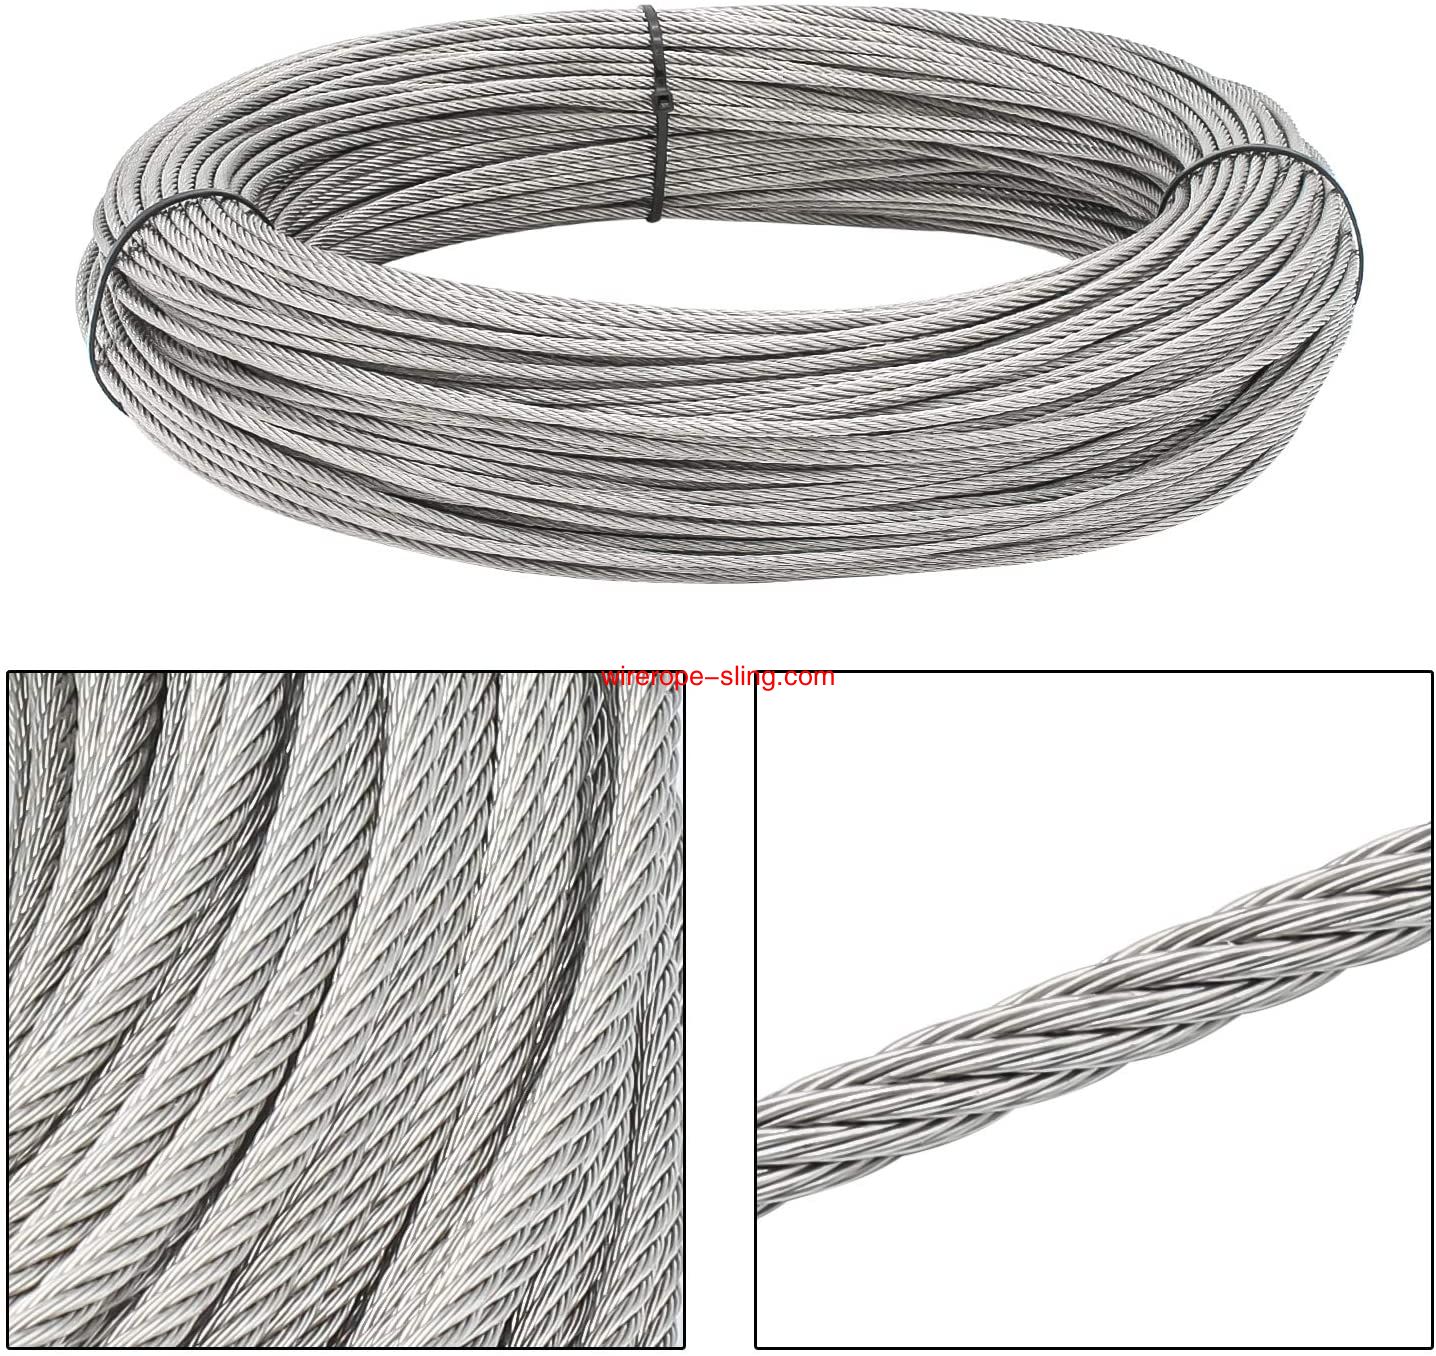 T316 Marine class 3 mm Stainless Steel Aircraft Wire rope Cable for Rails, decks, DIY Rails, 100 feet